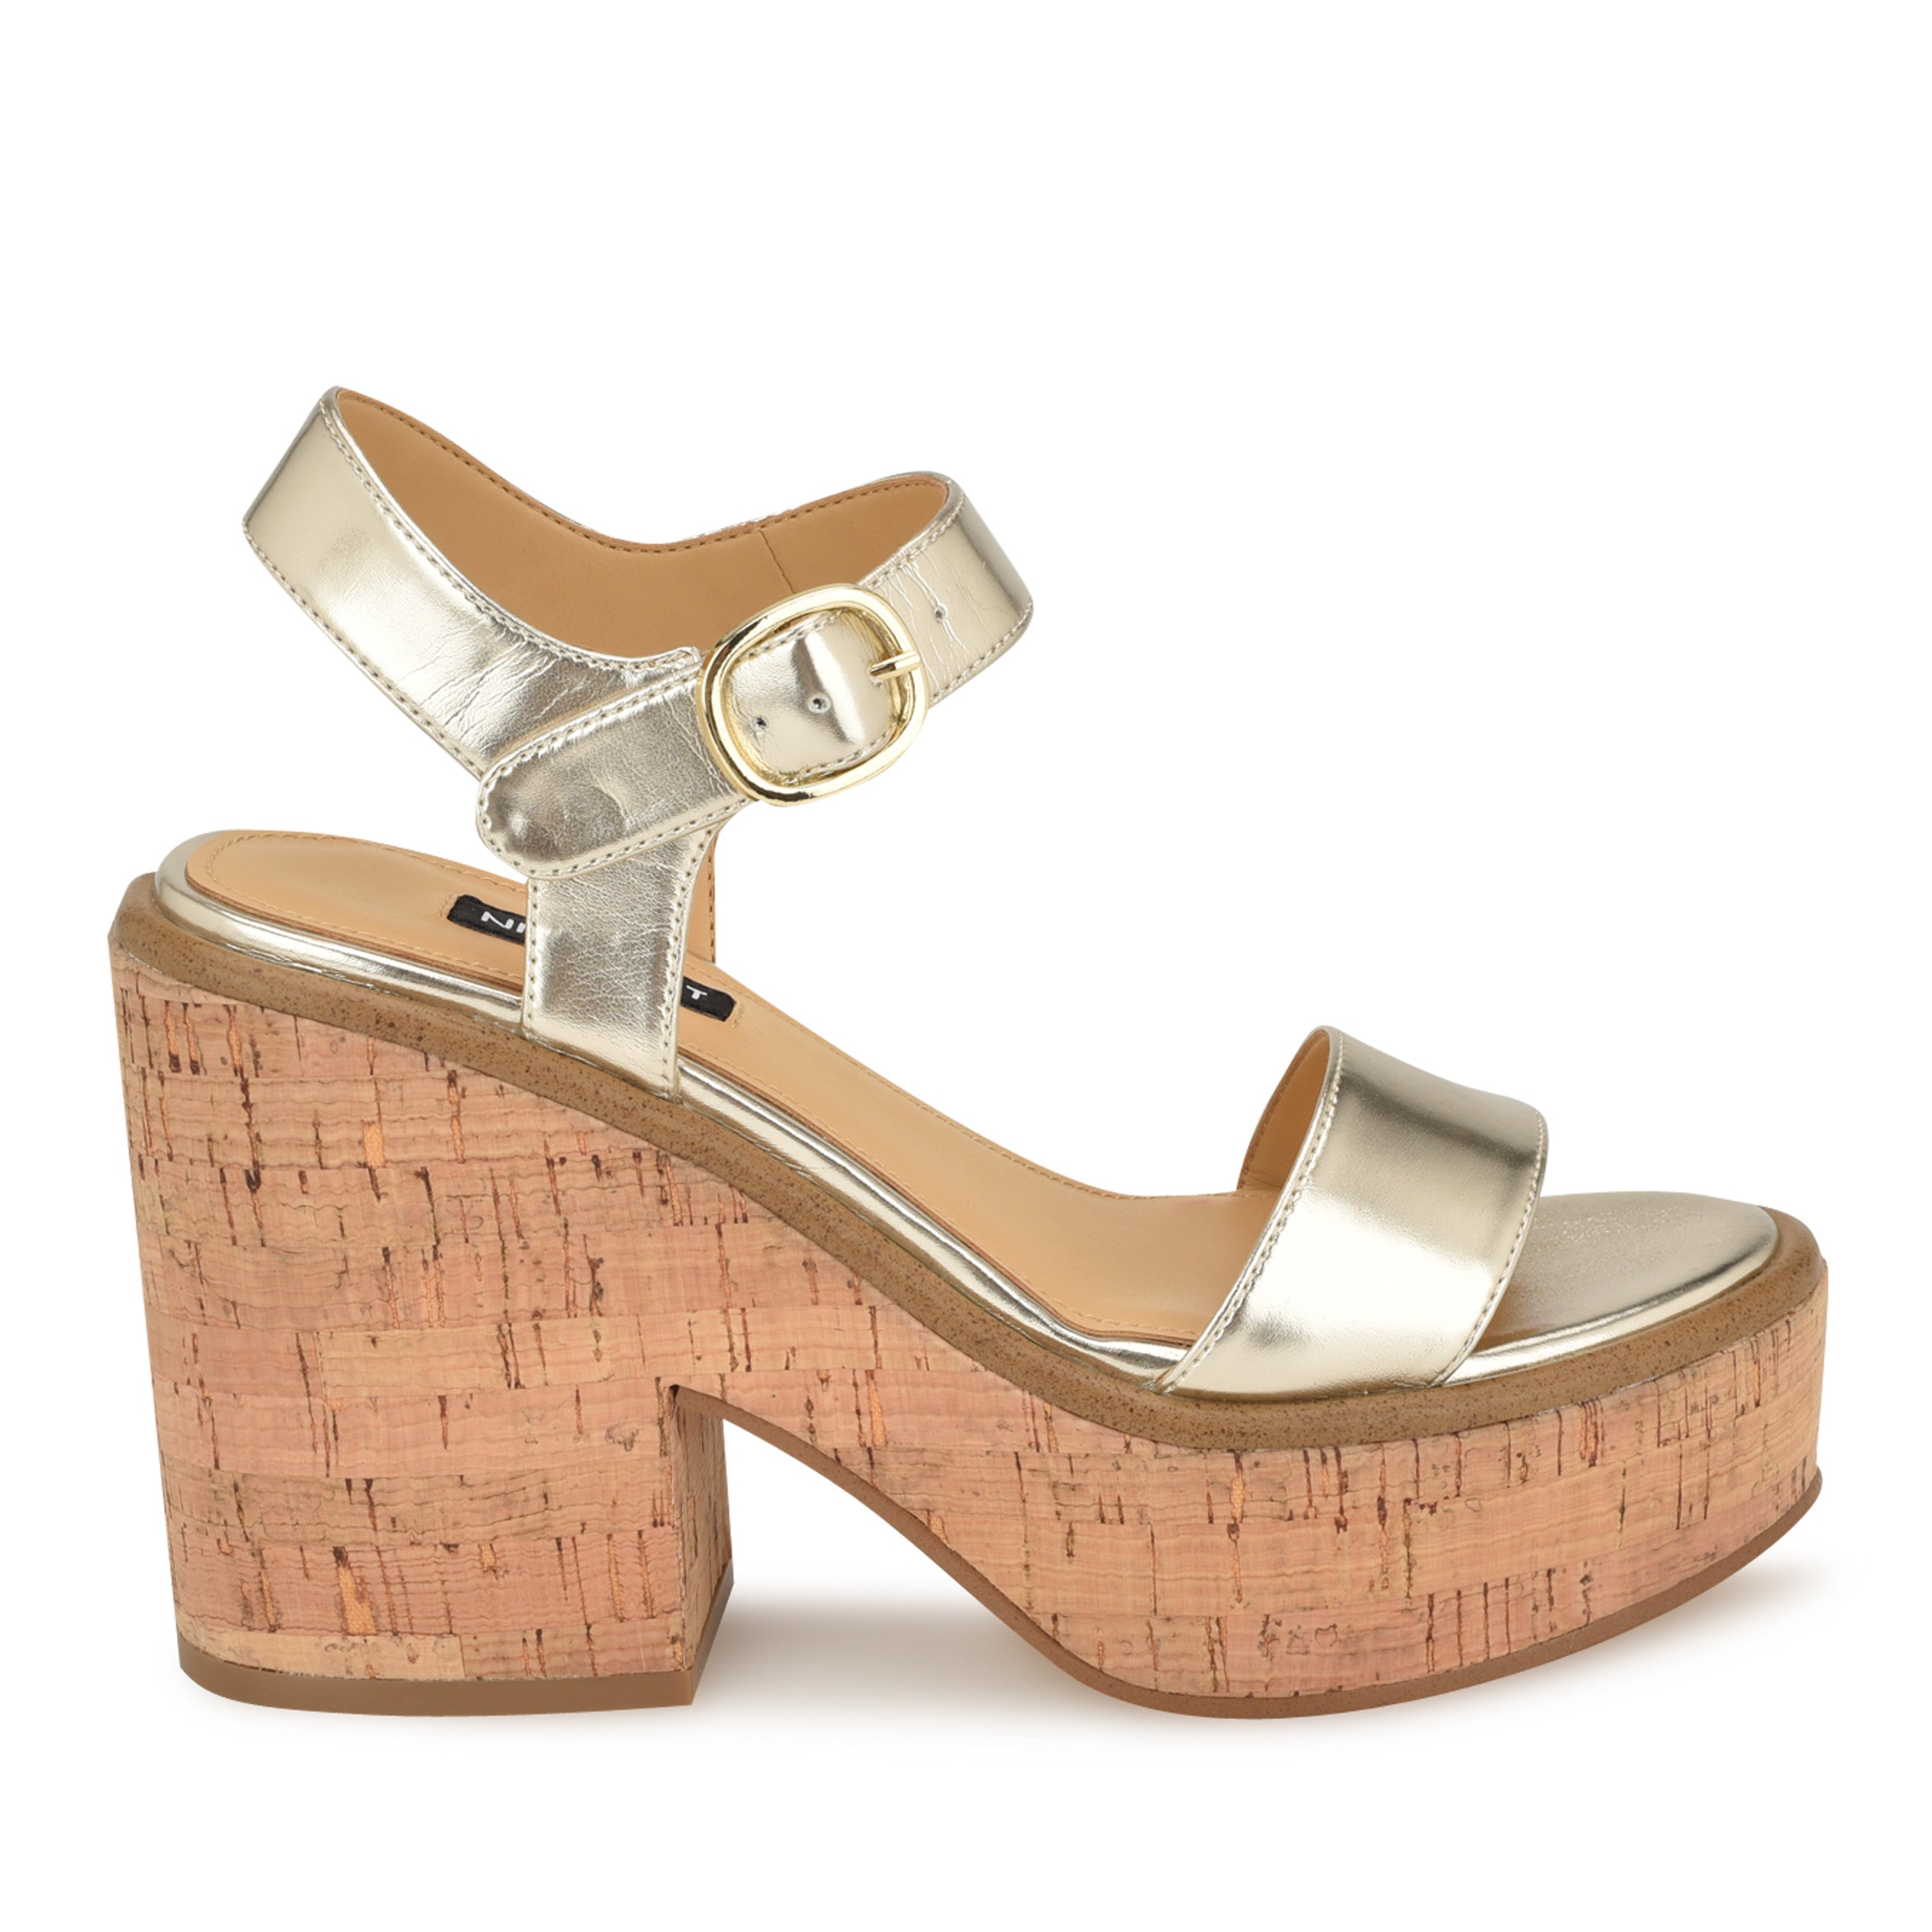 Amye Ankle Strap Wedge Sandals